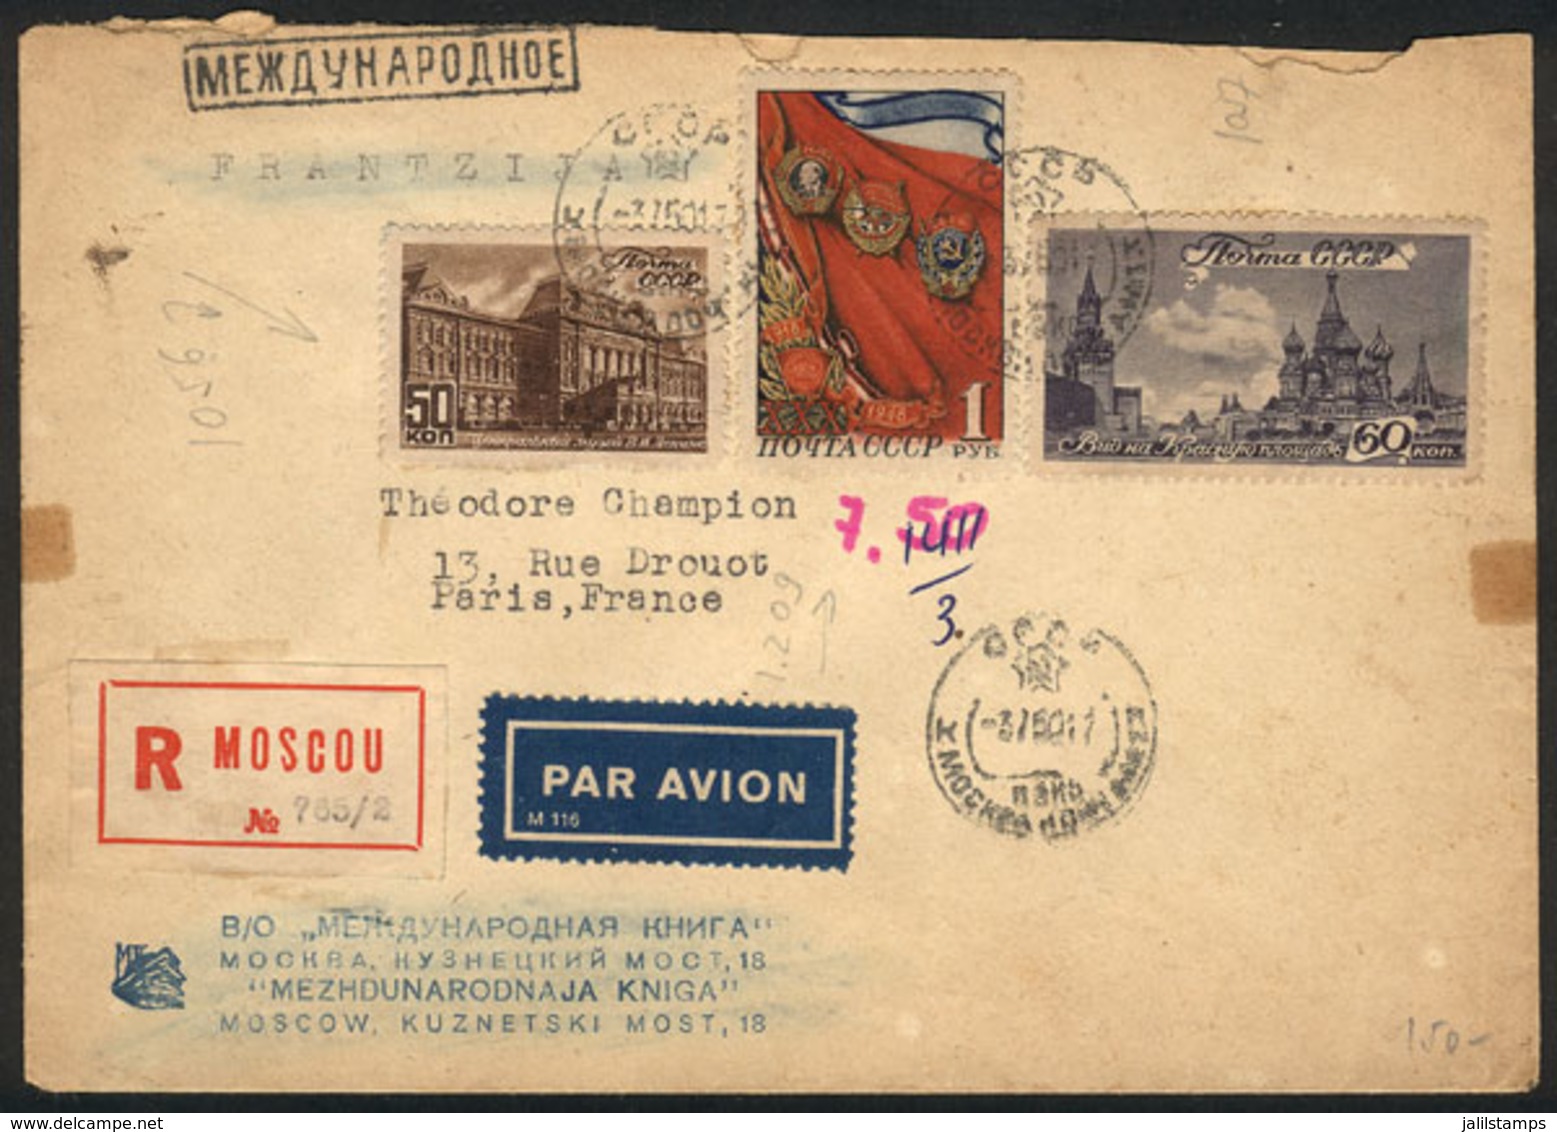 RUSSIA: Registered Cover Sent From Moscow To Paris, Nice Postage! - Covers & Documents